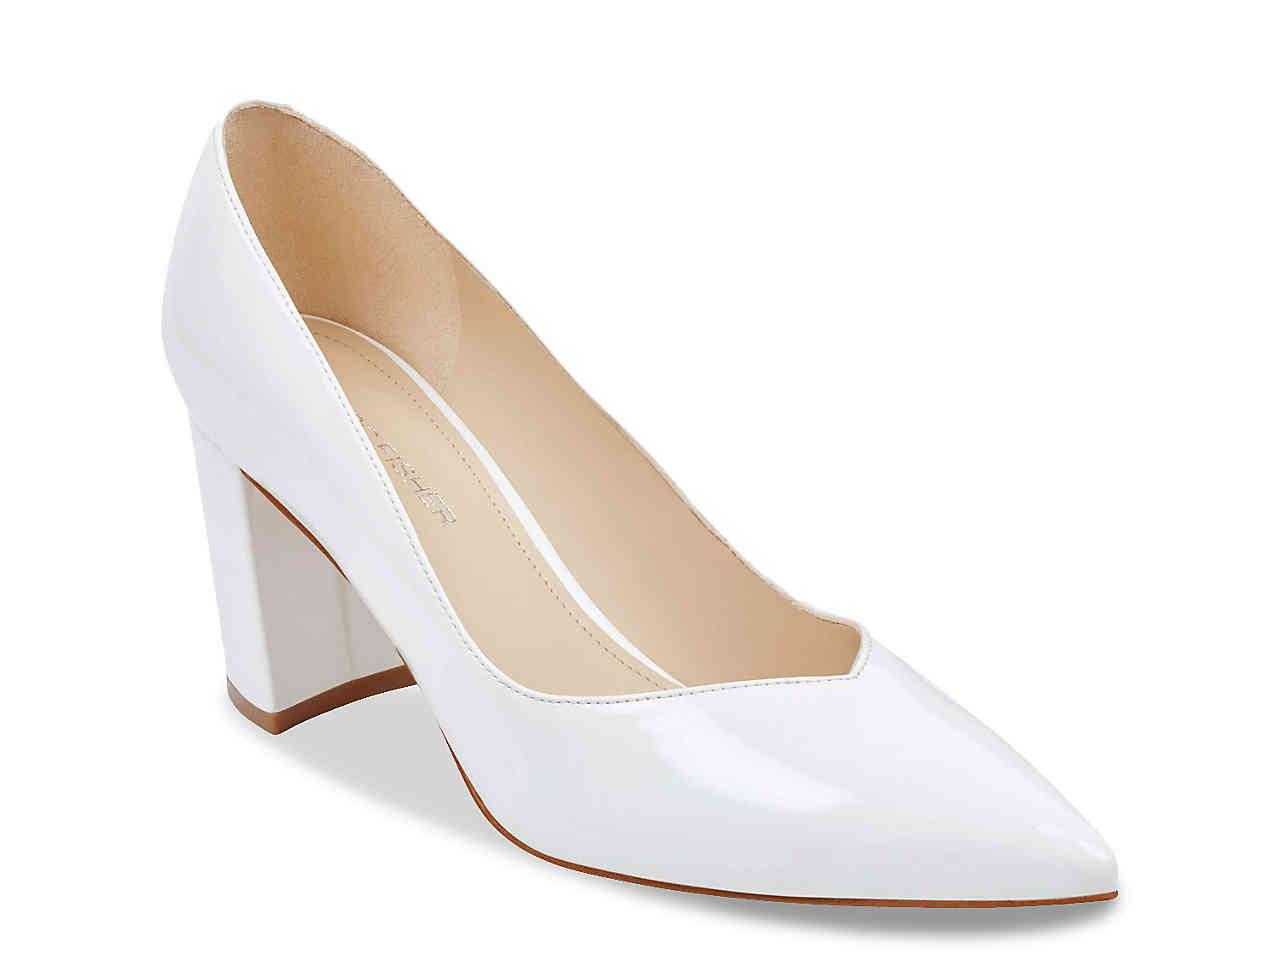 Lyst - Marc Fisher Caitlin Pump in White